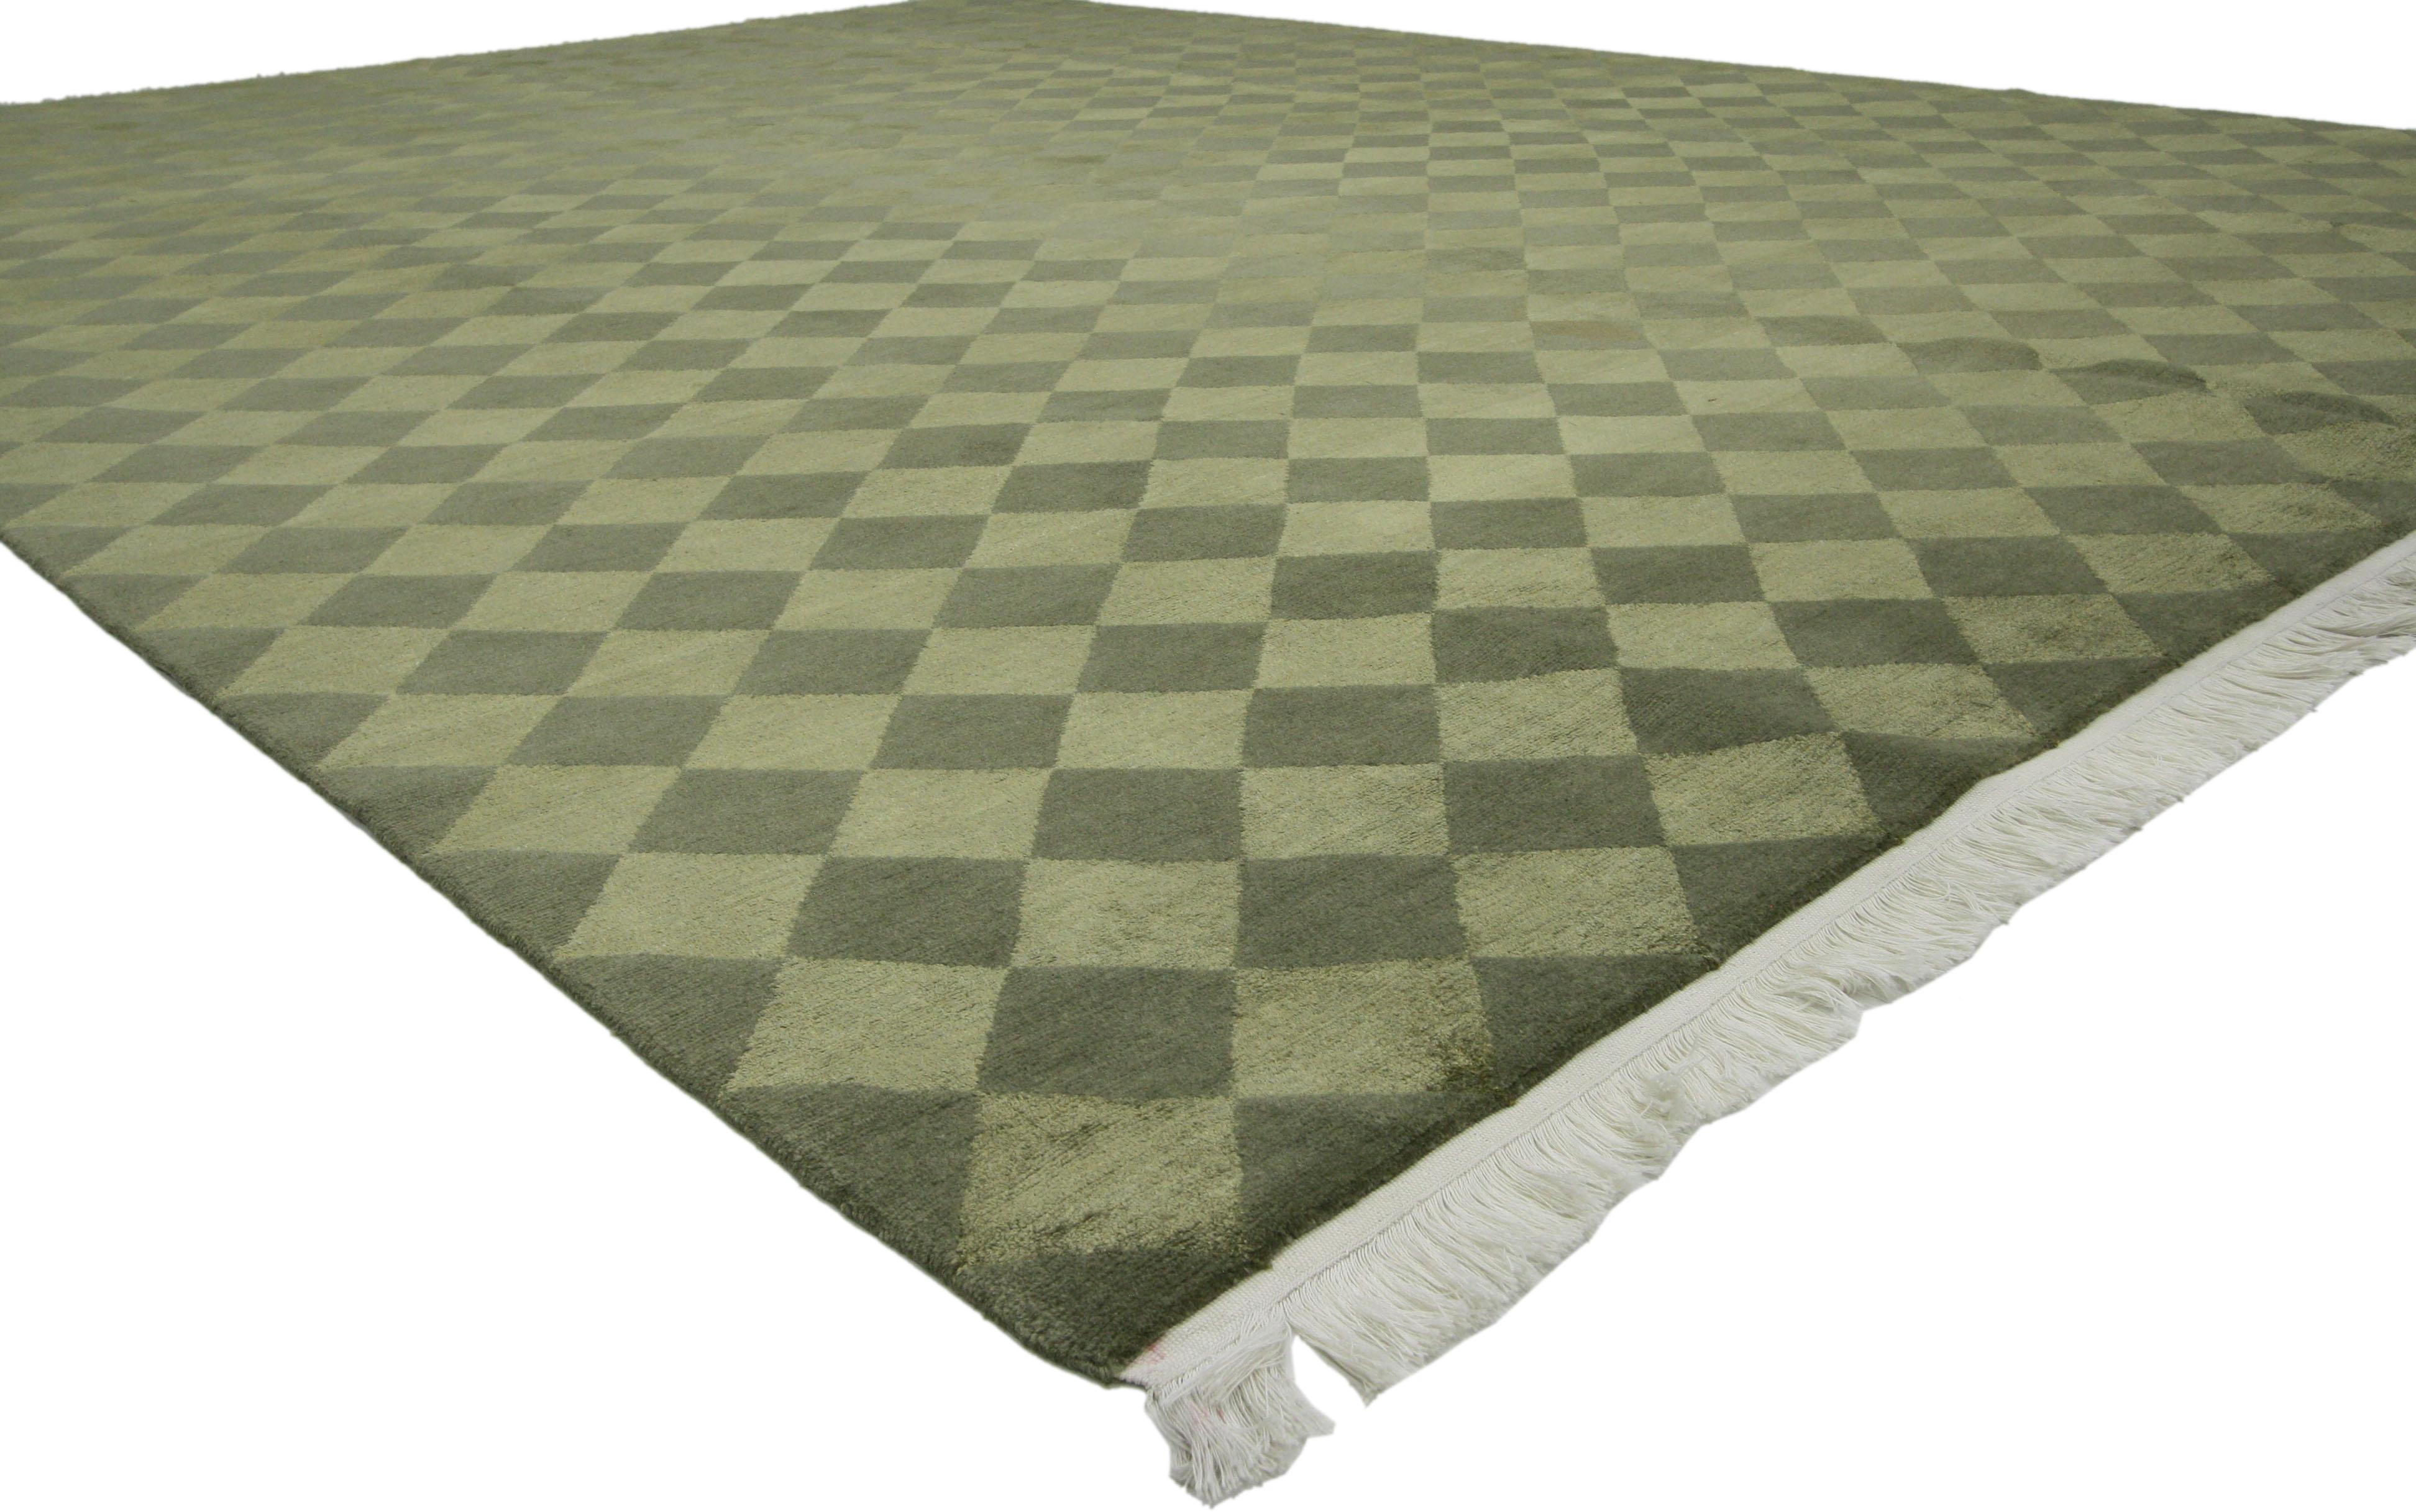 76665 Vintage Tibetan Area Rug with Diamond Checkerboard Pattern, Harlequin Design Rug 08'10 x 11'10. This hand-knotted wool and silk vintage Tibetan area rug features a diamond checkerboard pattern. The dense, lush pile of lustrous wool creates a